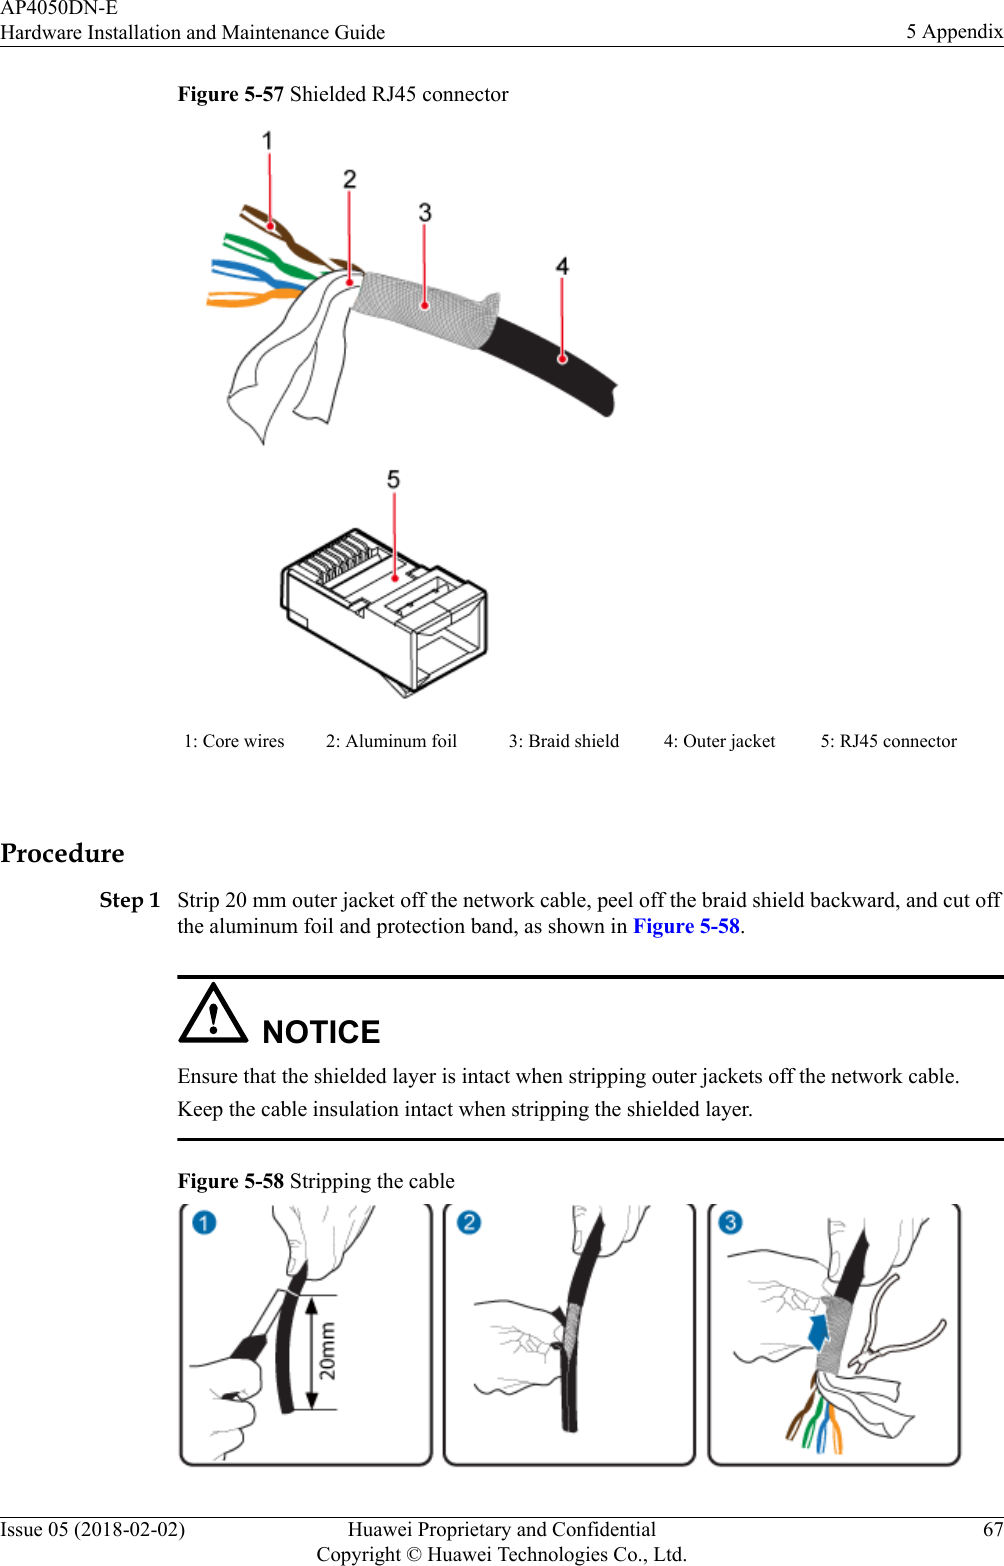 Figure 5-57 Shielded RJ45 connector1: Core wires 2: Aluminum foil 3: Braid shield 4: Outer jacket 5: RJ45 connector ProcedureStep 1 Strip 20 mm outer jacket off the network cable, peel off the braid shield backward, and cut offthe aluminum foil and protection band, as shown in Figure 5-58.NOTICEEnsure that the shielded layer is intact when stripping outer jackets off the network cable.Keep the cable insulation intact when stripping the shielded layer.Figure 5-58 Stripping the cableAP4050DN-EHardware Installation and Maintenance Guide 5 AppendixIssue 05 (2018-02-02) Huawei Proprietary and ConfidentialCopyright © Huawei Technologies Co., Ltd.67